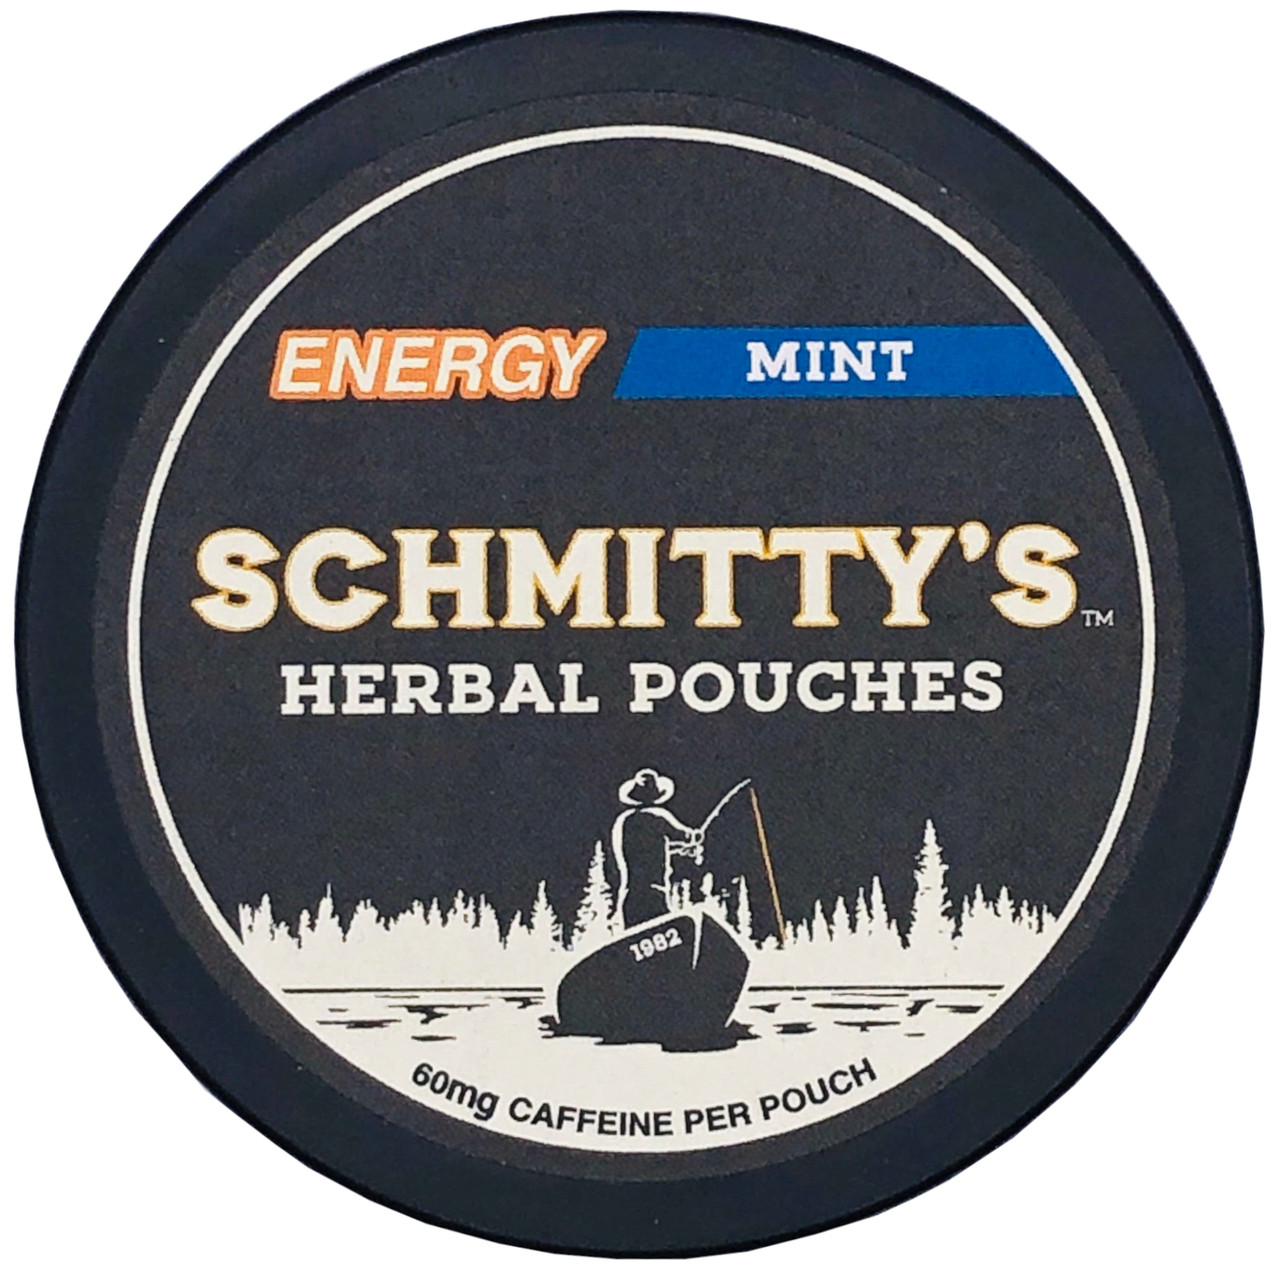 Schmitty's Herbal Snuff Energy Pouches Mint 1 Can